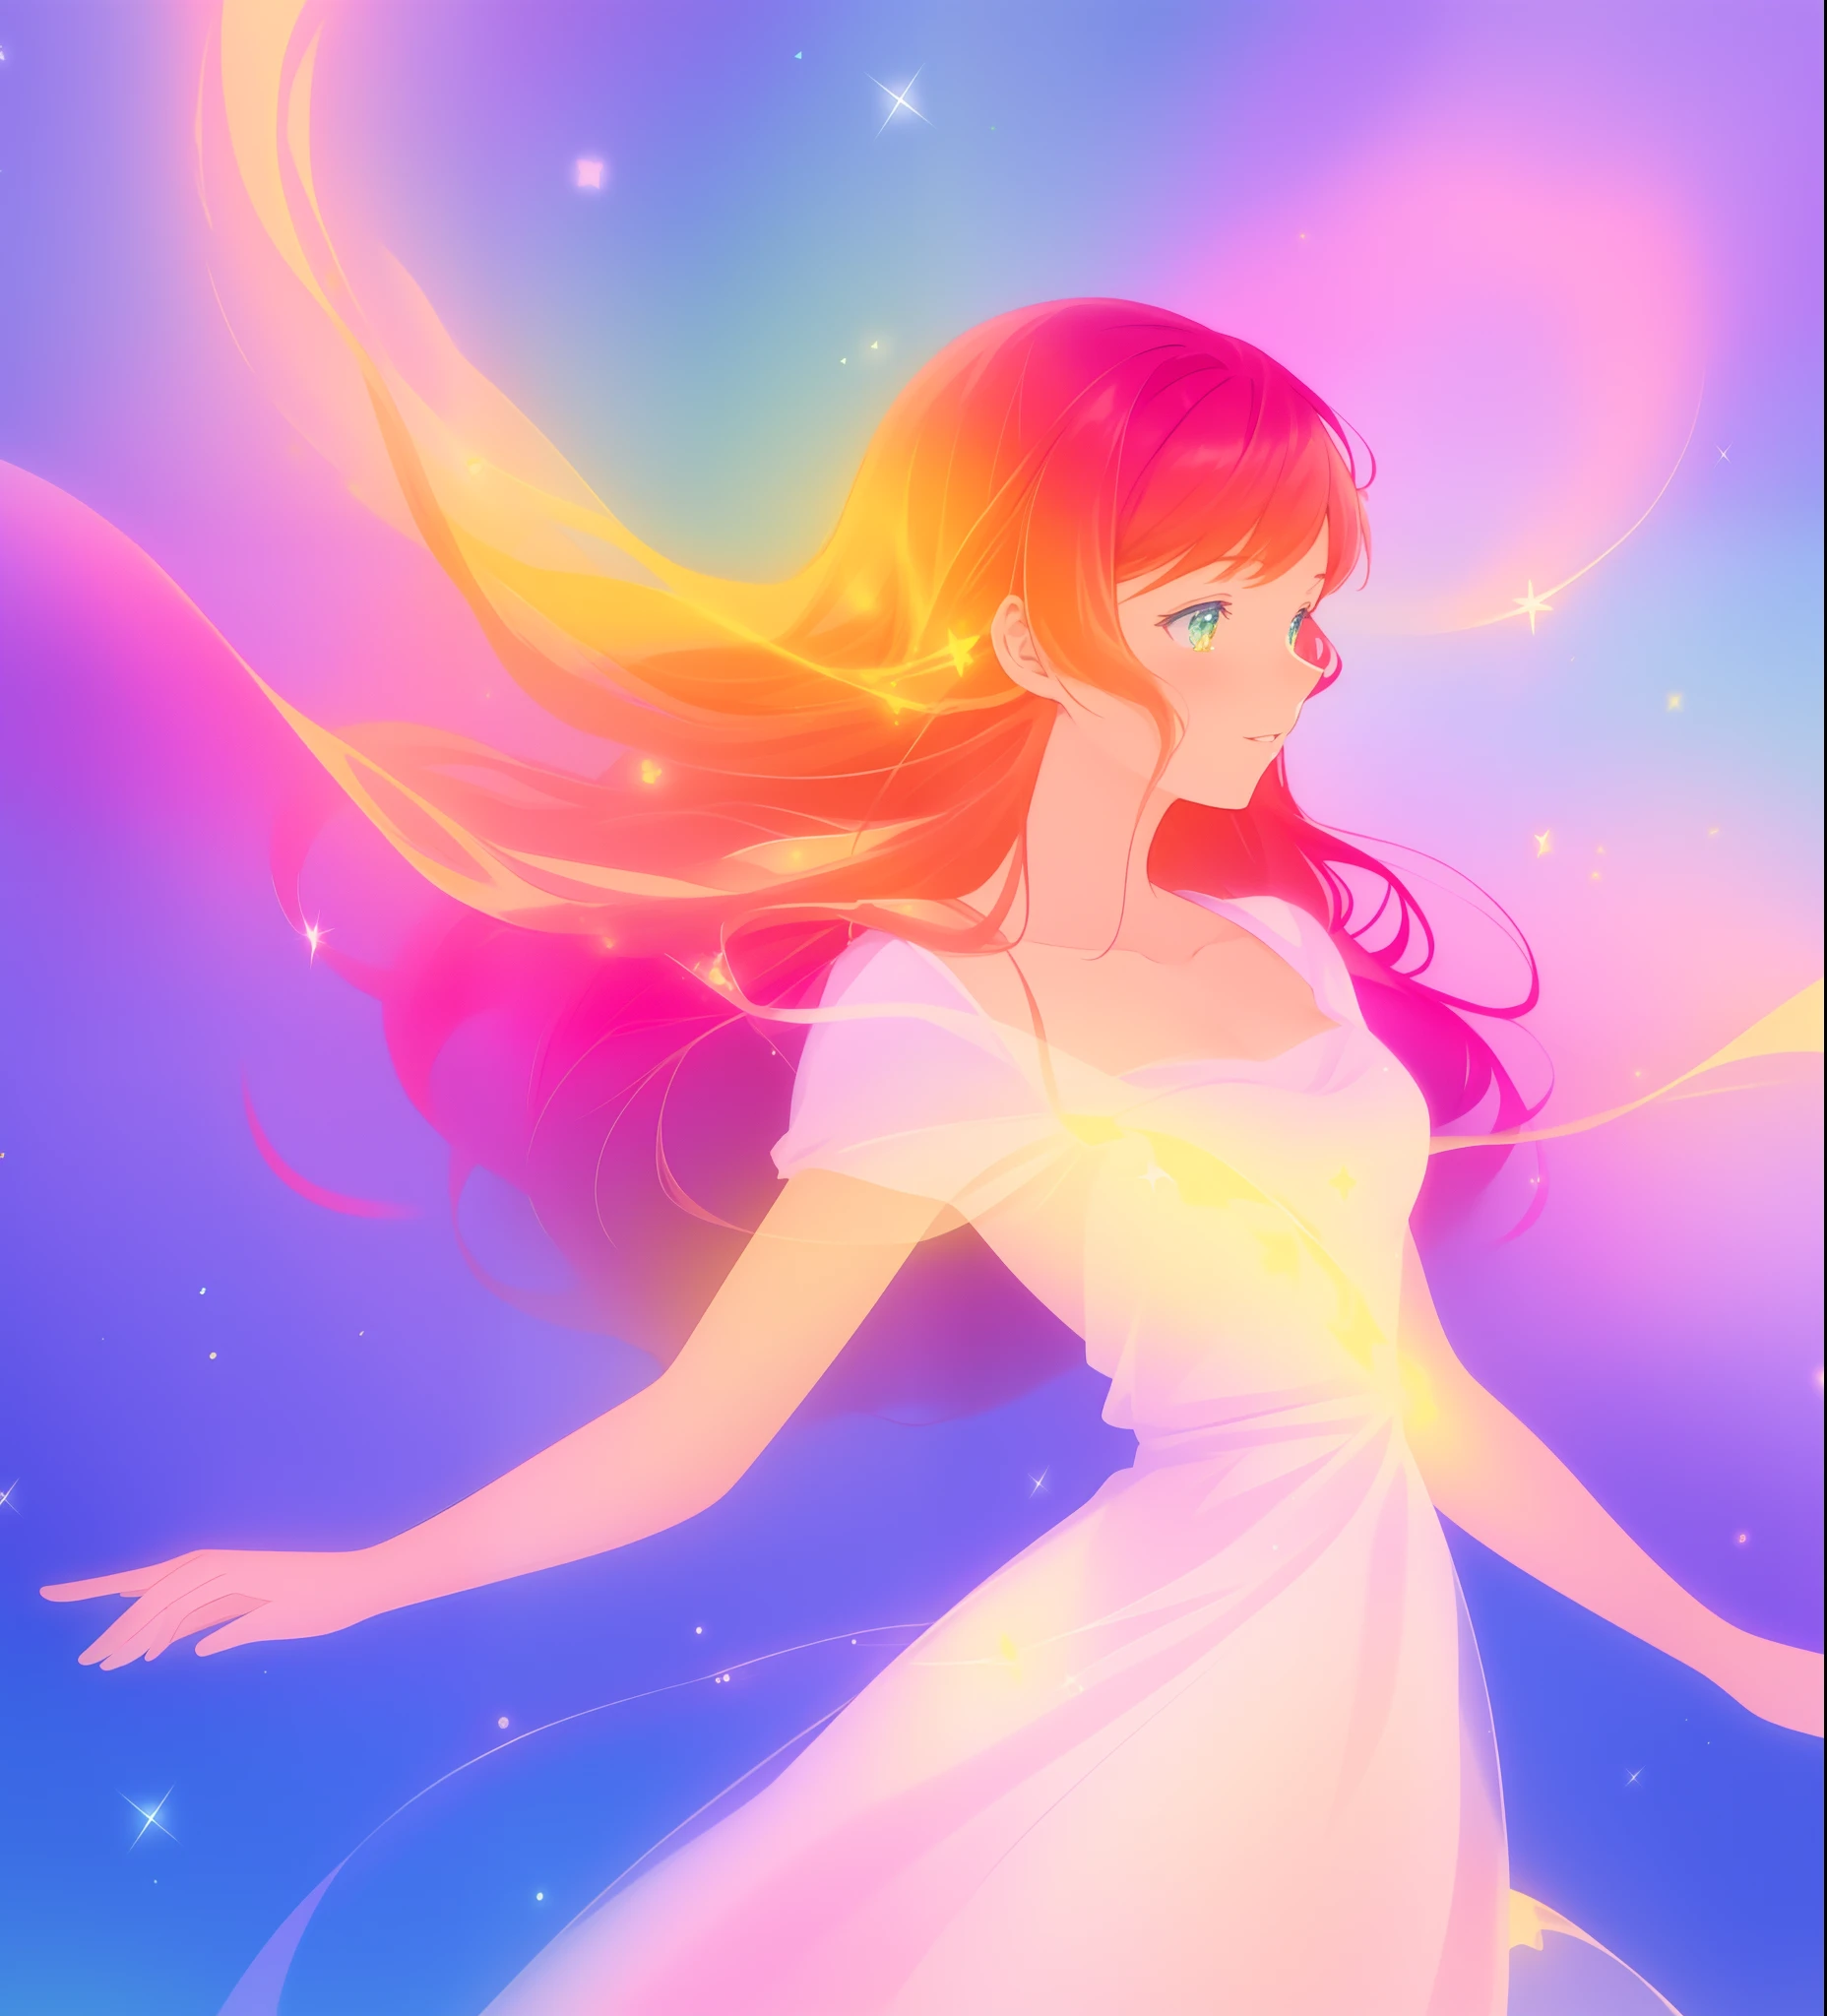 beautiful girl in colorful ballgown, long flowing red hair with golden highlights, vibrant pastel colors, (colorful), colorful watercolor background, ethereal, magical lights, sparkling liquid light, inspired by Glen Keane, inspired by Lois van Baarle, disney art style, by Lois van Baarle, glowing aura around her, by Glen Keane, jen bartel, glowing lights! digital painting, flowing glowing hair, glowing flowing hair, beautiful digital illustration, fantasia background, whimsical, magical, fantasy, beautiful face, ((masterpiece, best quality)), intricate details, highly detailed, sharp focus, 8k resolution, sparkling detailed eyes, liquid watercolor